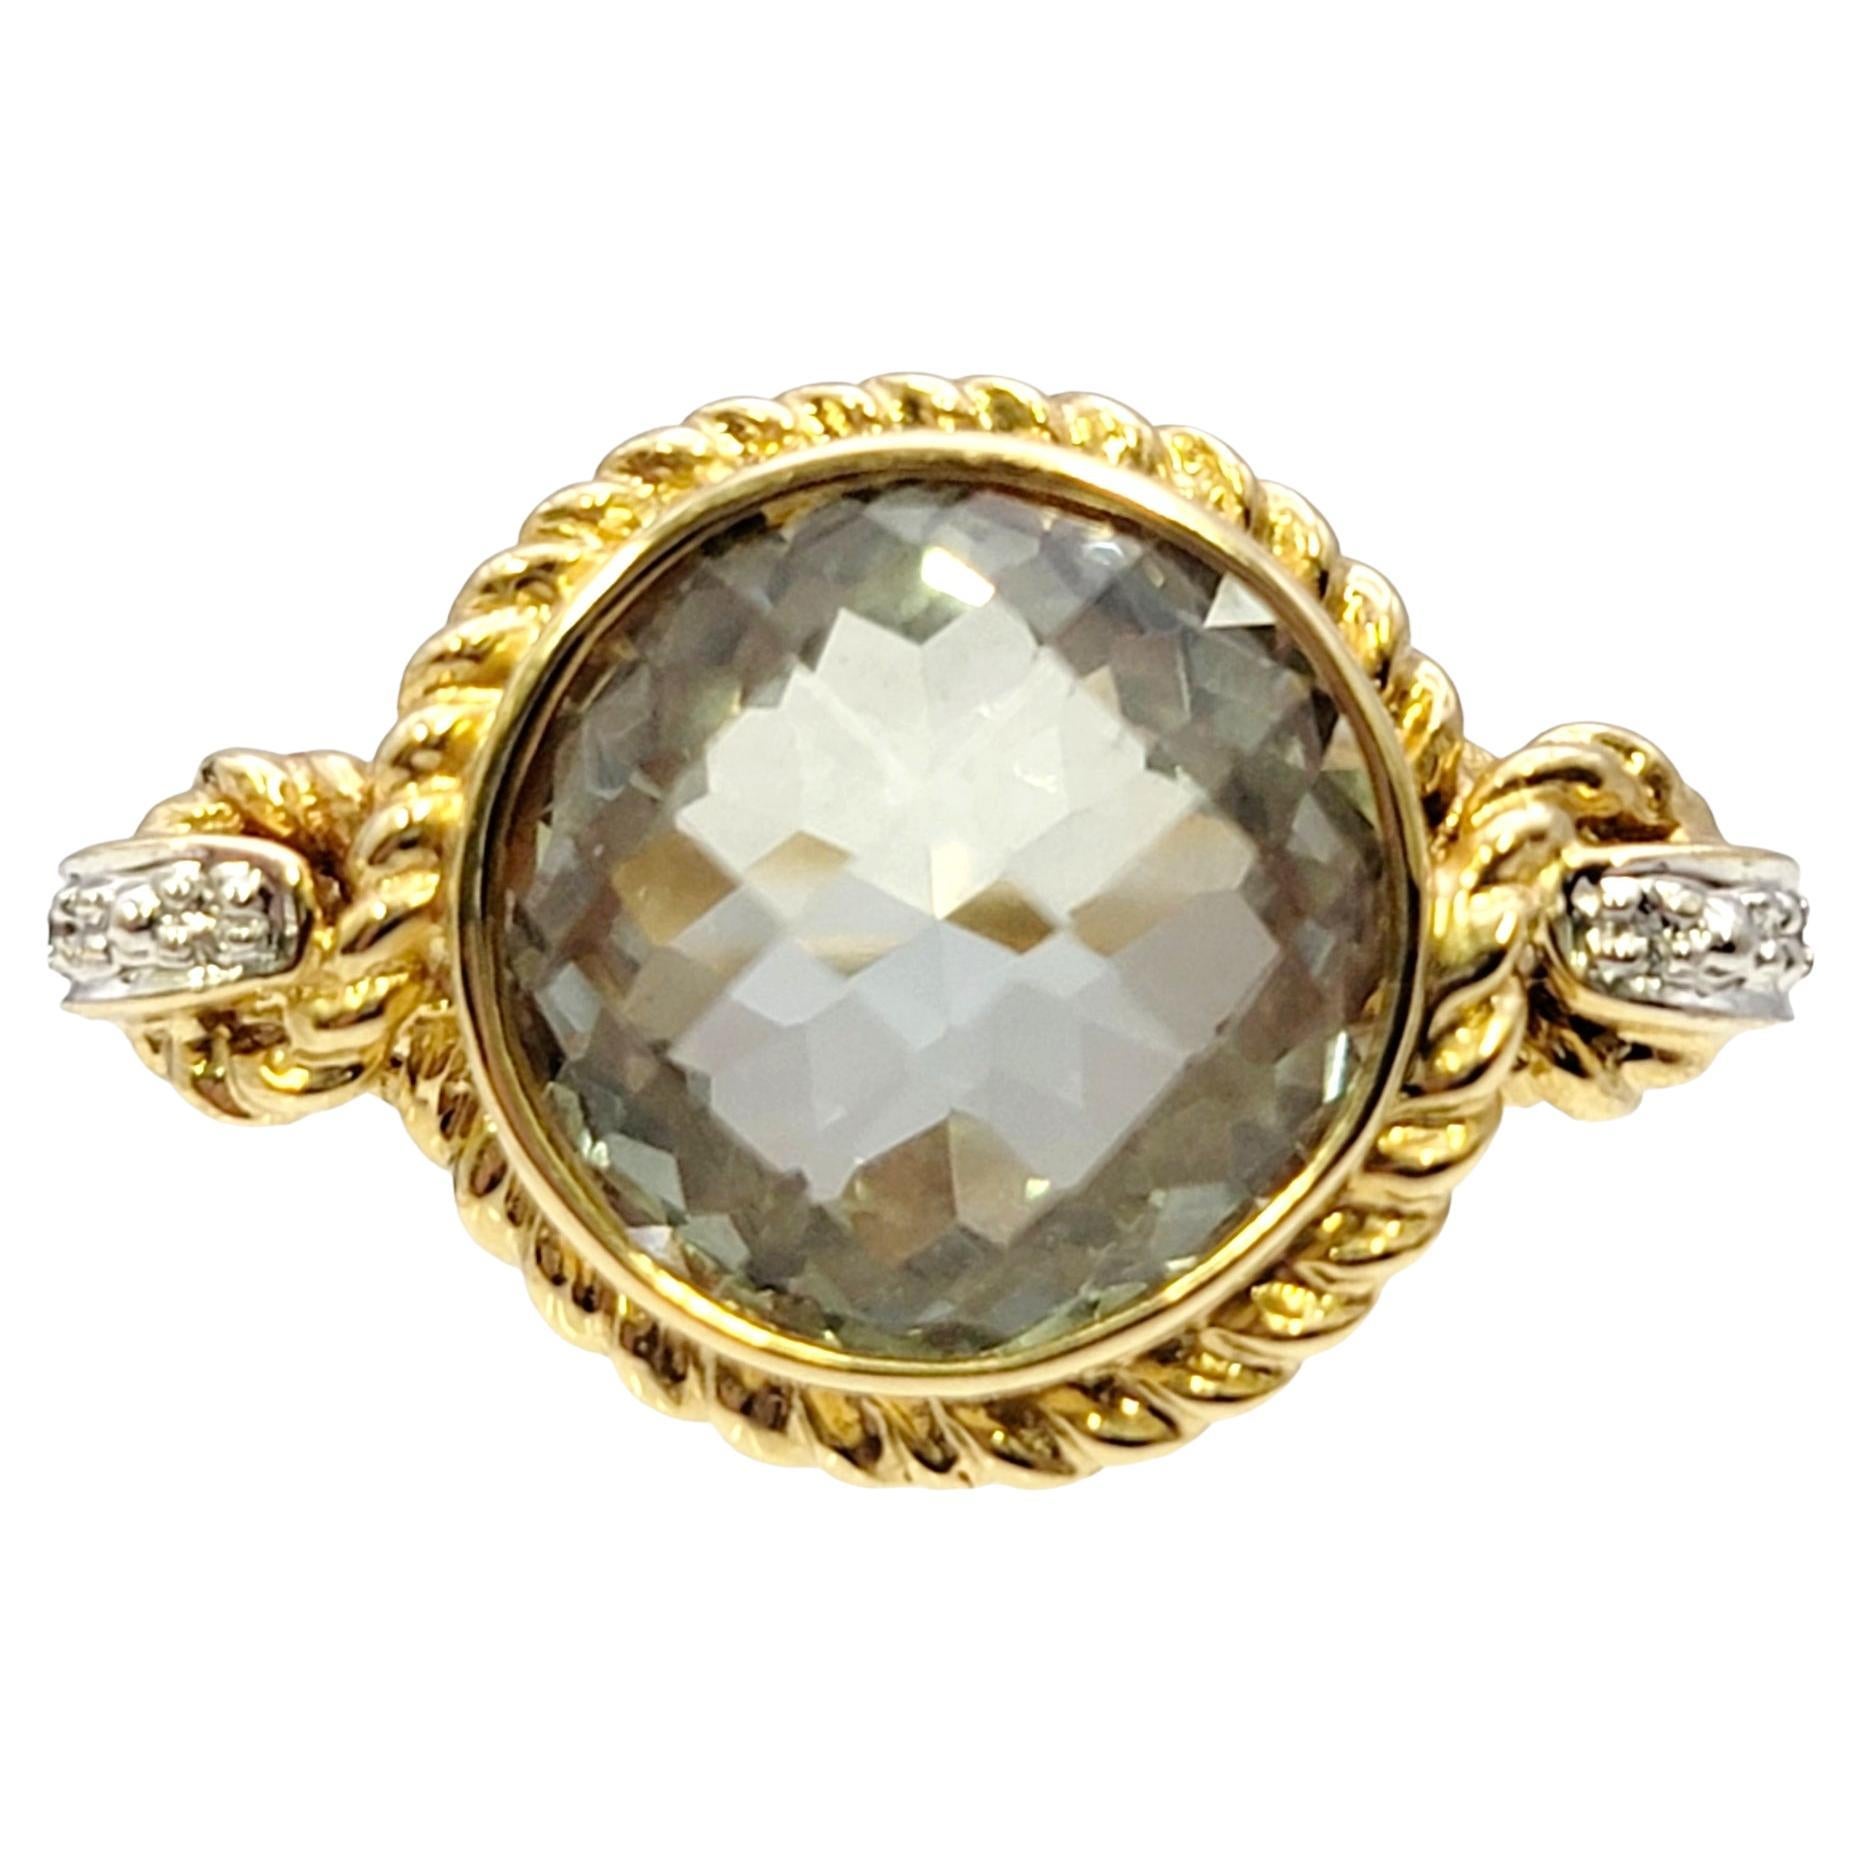 Ring size: 5.5

Stunningly designed prasiolite solitaire ring with diamond accents. This remarkable light green checkerboard cut stone is surrounded by incredible detail work, with delicate swirling loops and a twisted rope design in a warm 14K